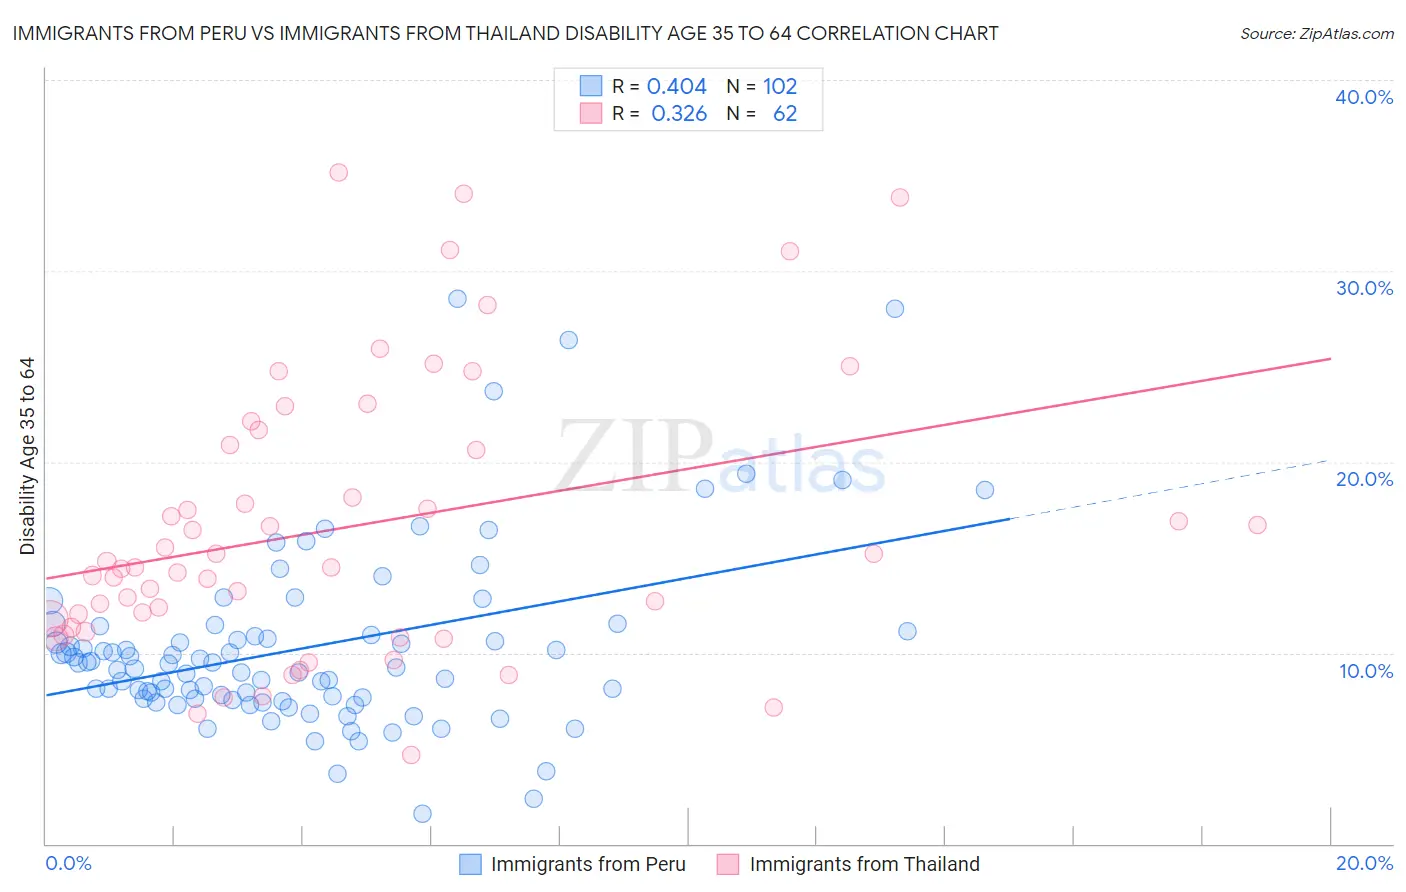 Immigrants from Peru vs Immigrants from Thailand Disability Age 35 to 64